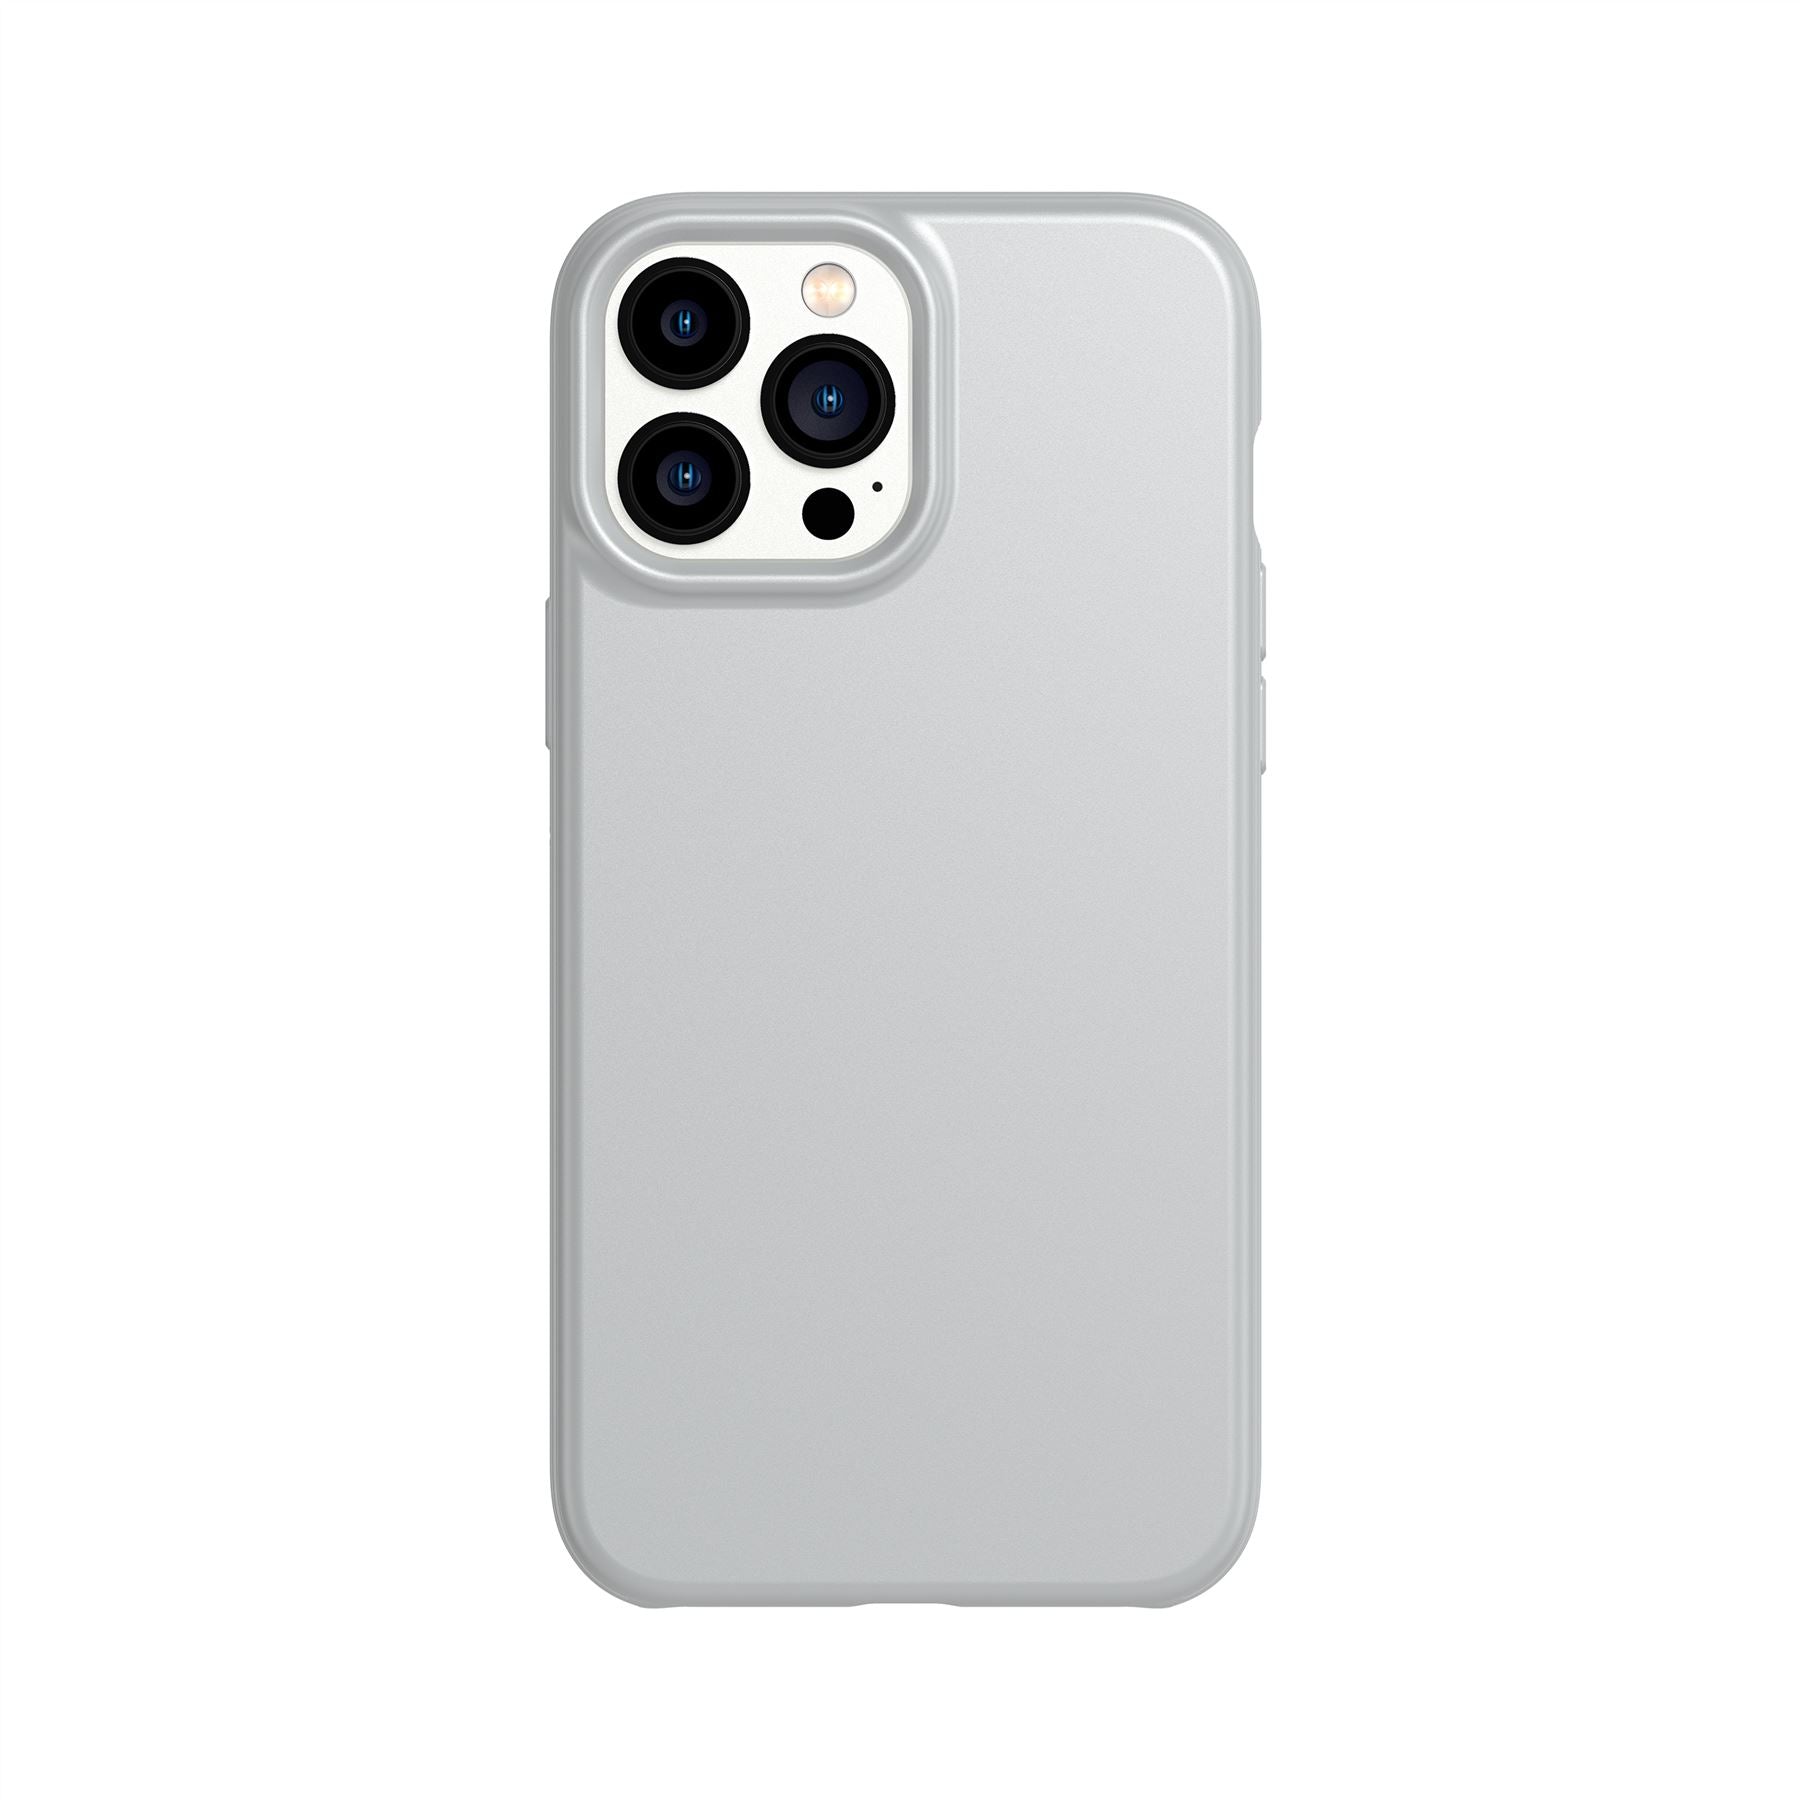 Iphone 11 Pro Max Silicon Soft Touch Cases Price in pakistan